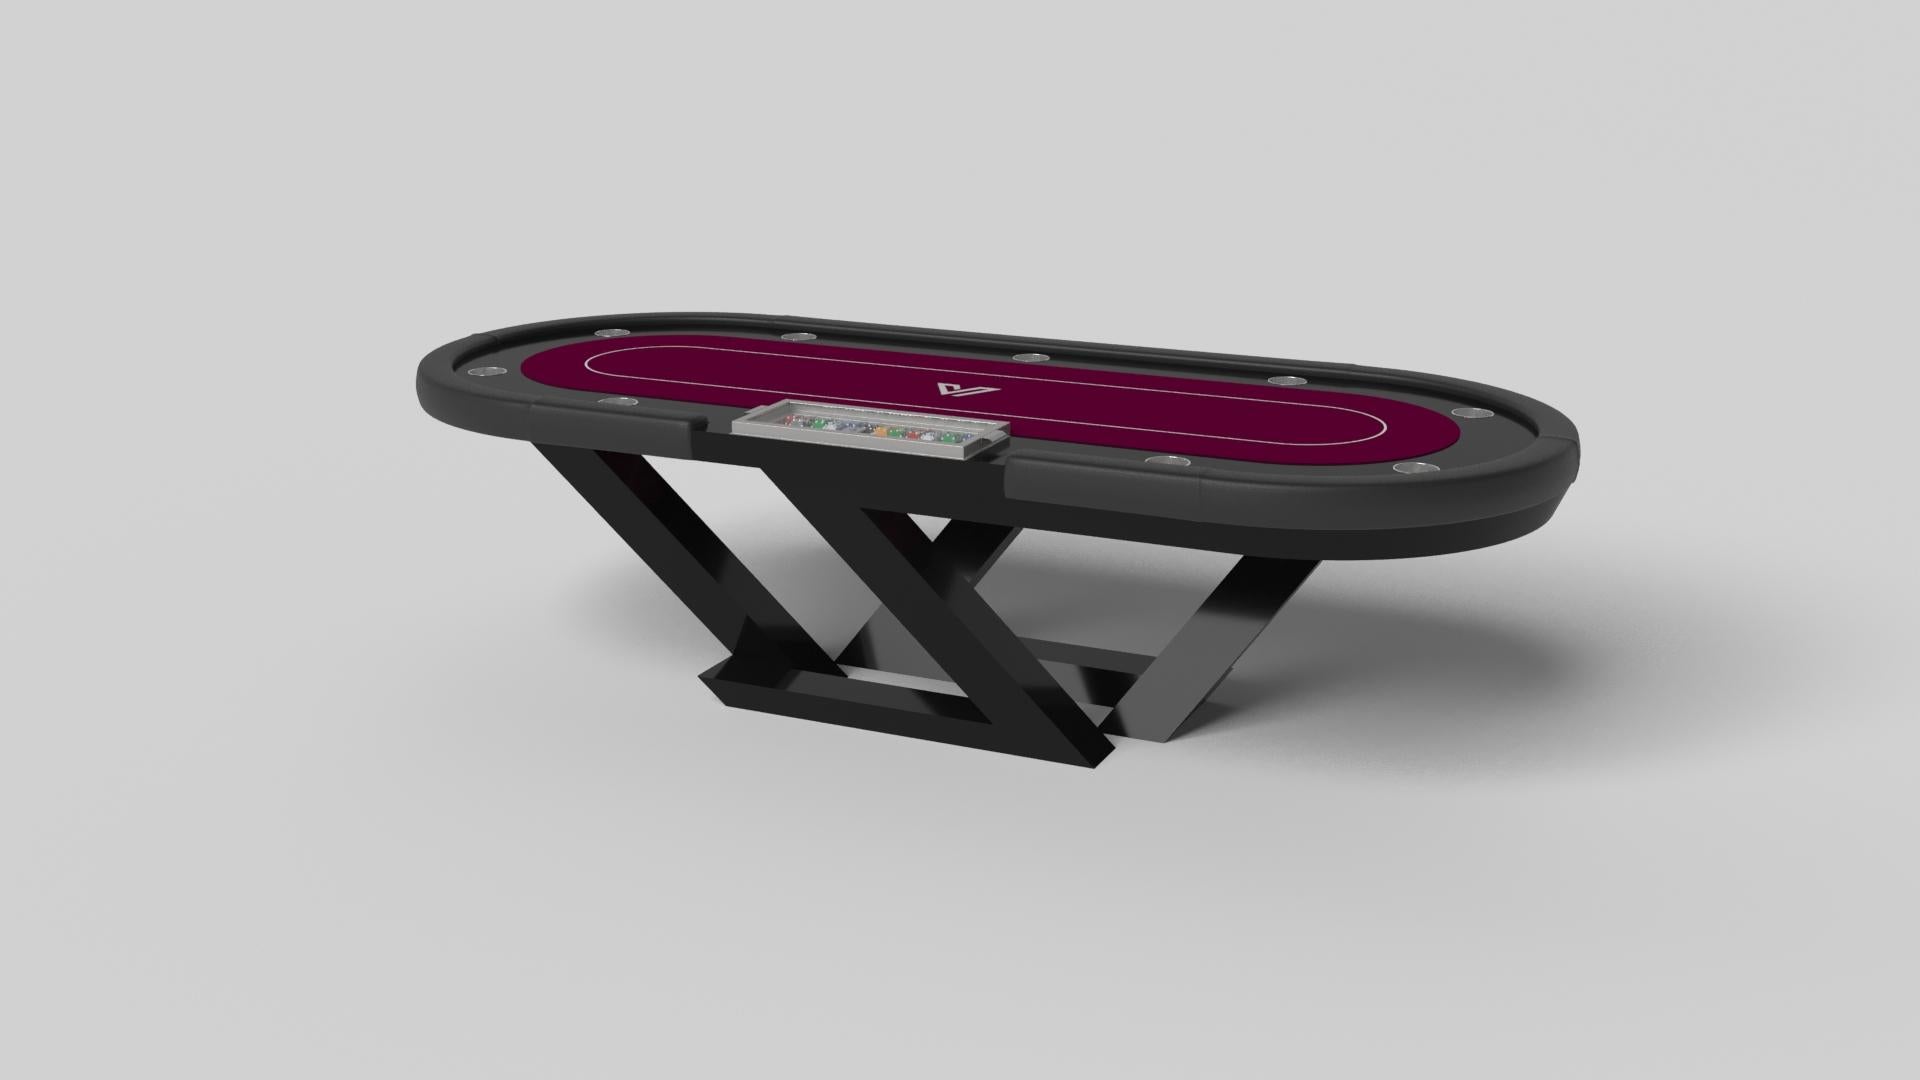 A contemporary composition of clean lines and sleek edges, the Trinity poker table in black chrome with red accent is an elegant expression of modern design. Handcrafted from durable metal with vibrant red accents and a regulation top for